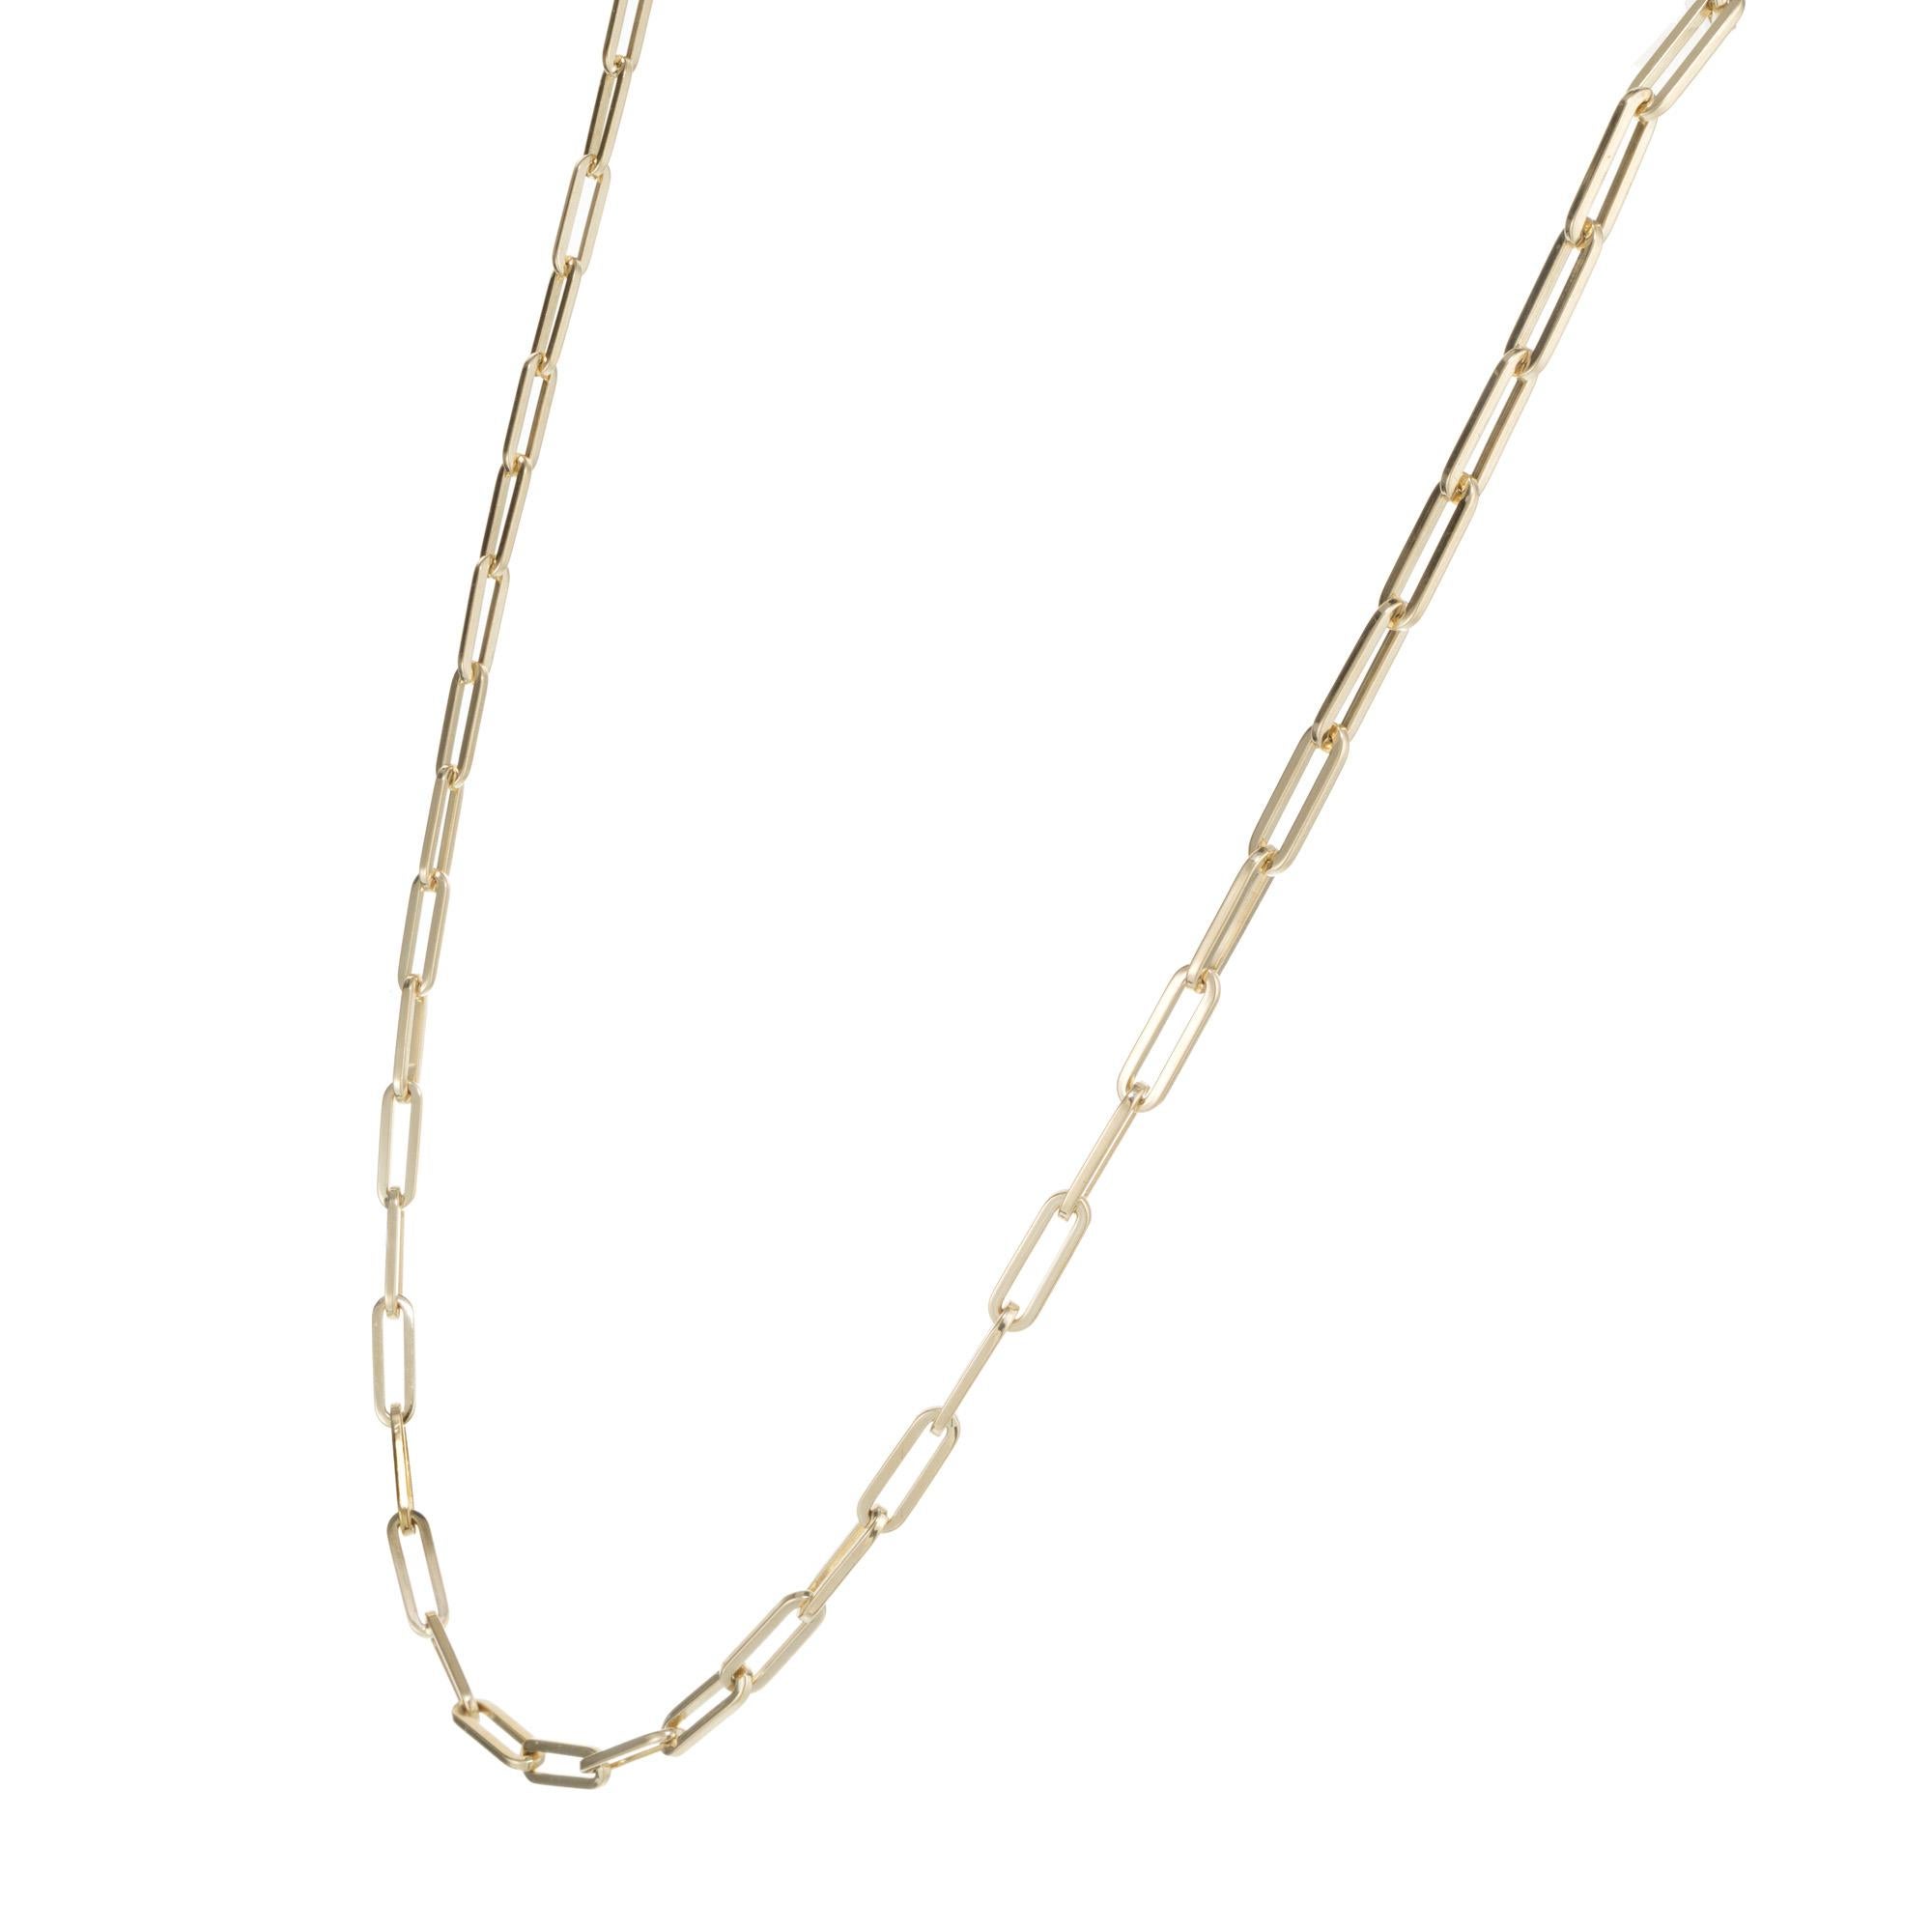 14k yellow gold Paper Clip link necklace. 18 inches in length. 

18k yellow gold
Length: 18 inches
Weight: 14.5 grams
